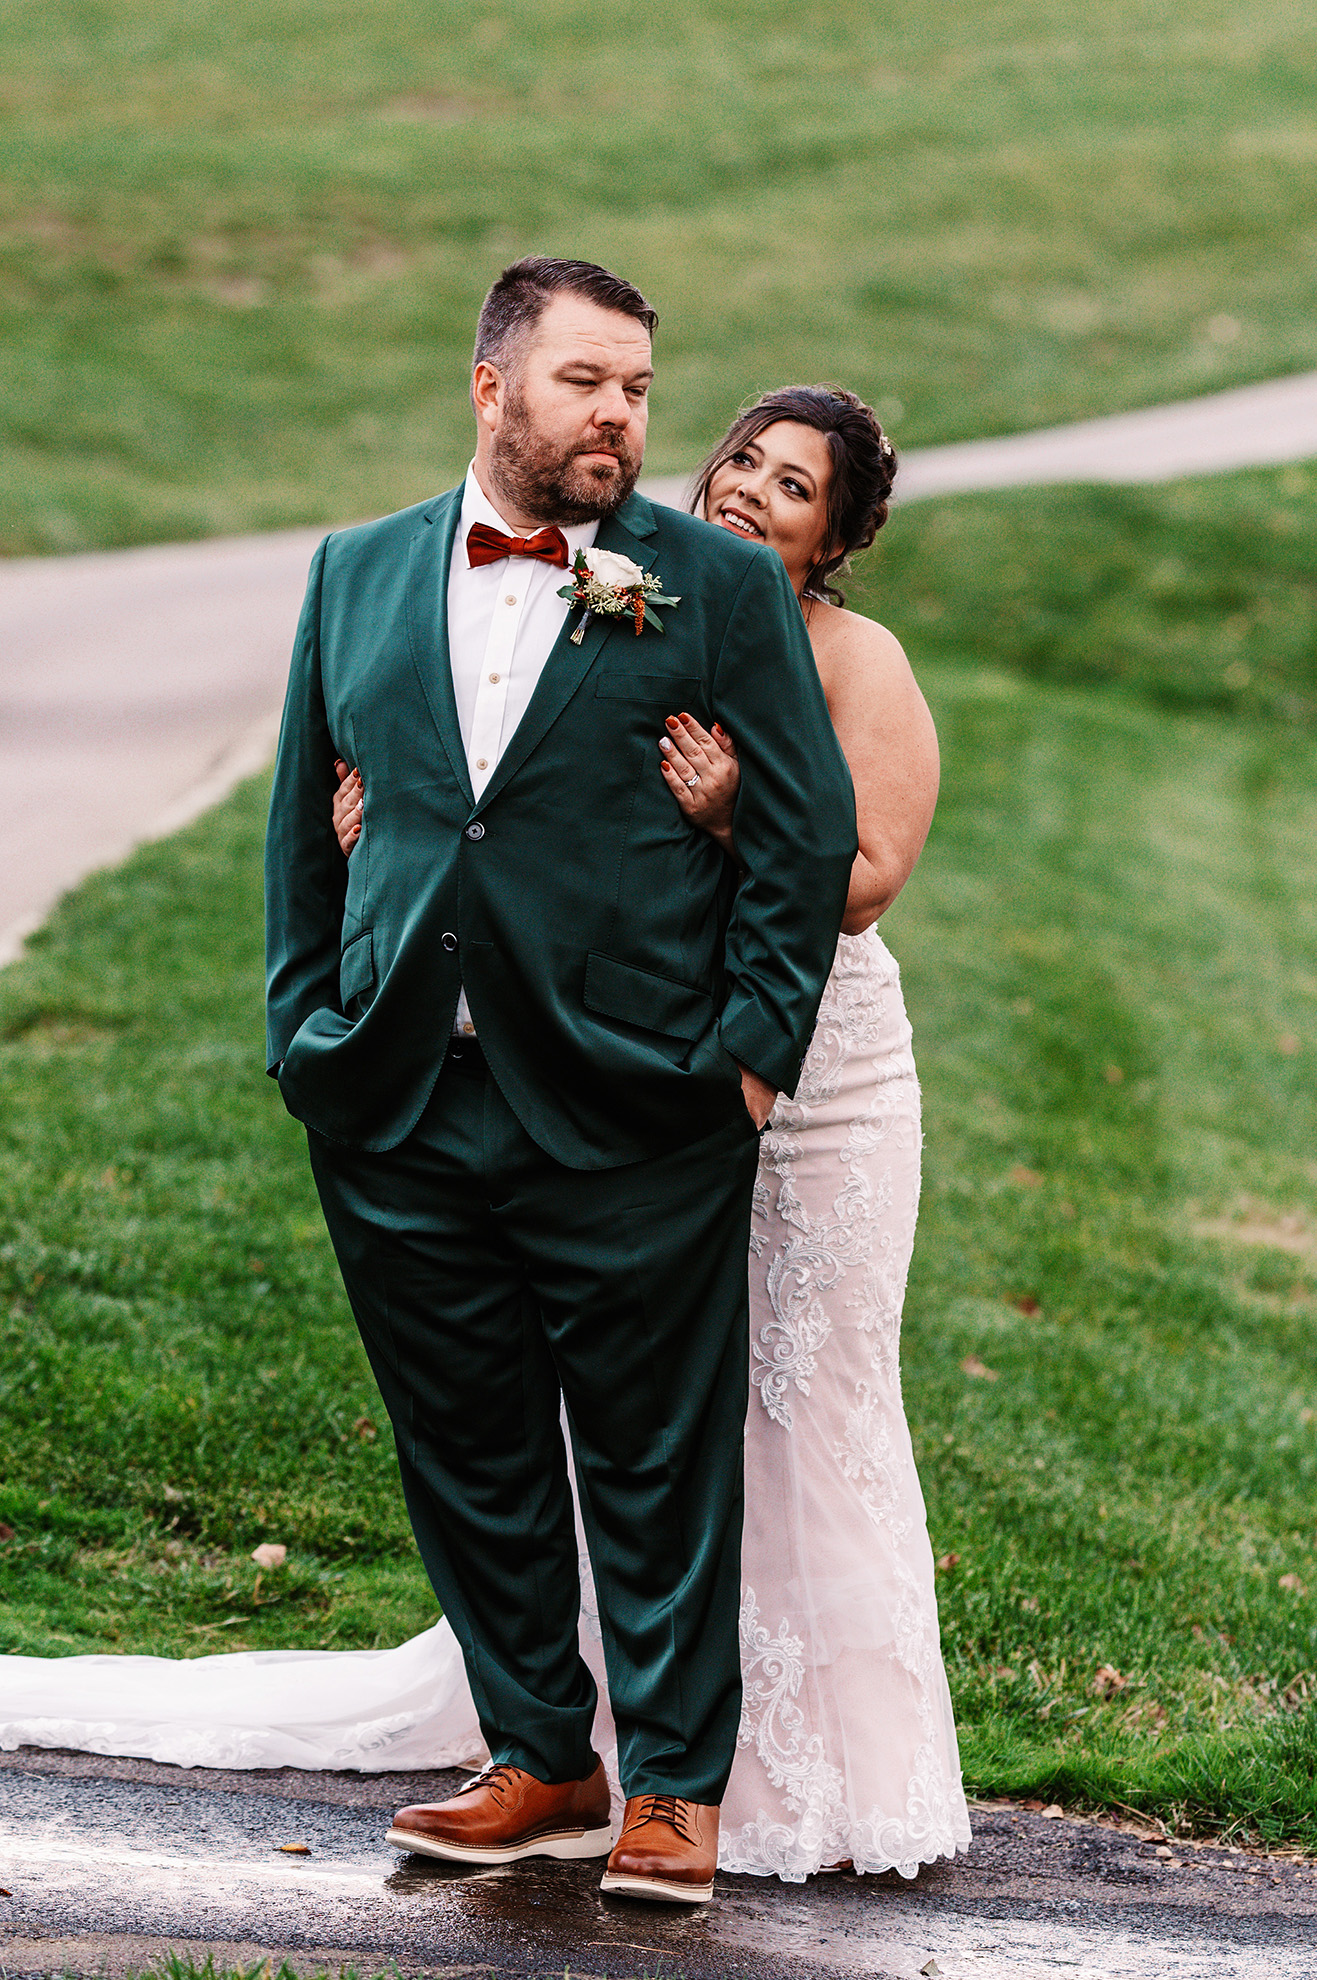 Groom in green suit with bride standing behind him. Photo by Olga Hinchman Photography